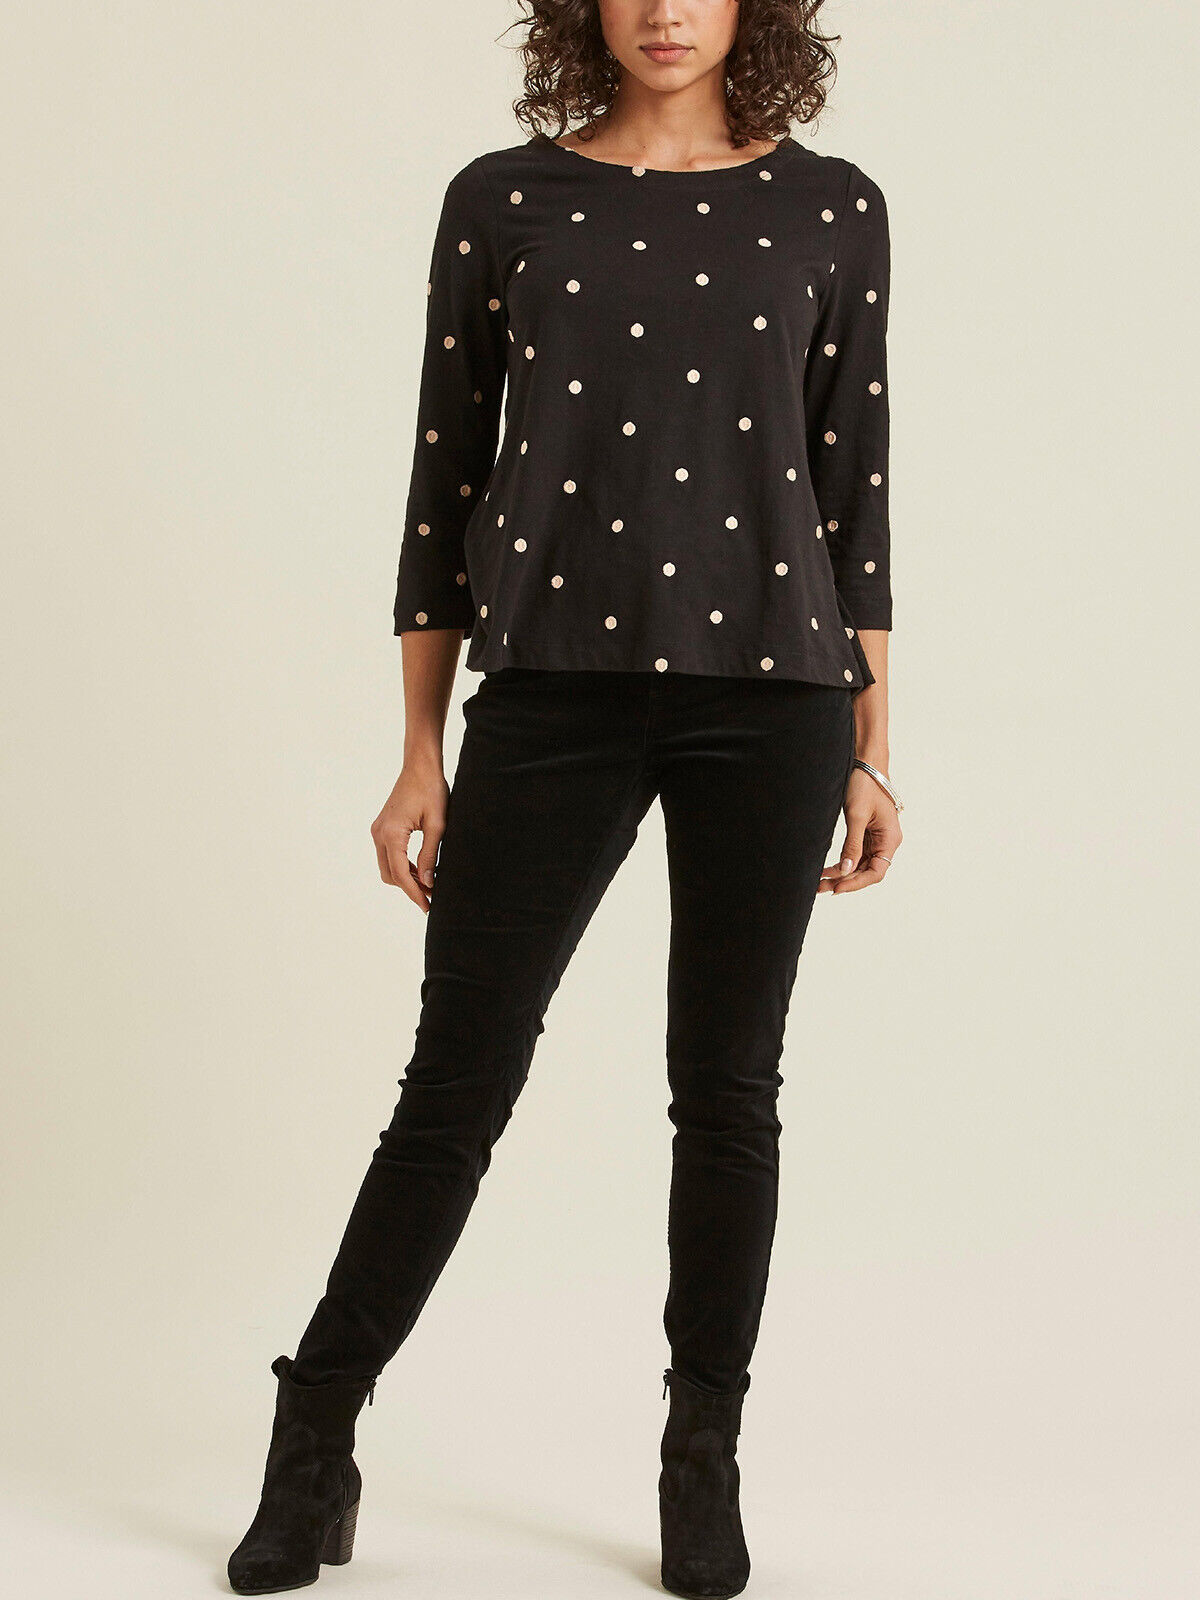 EX Fat Face Black Faye Embroidered Spot Top in Size 12 RRP £36